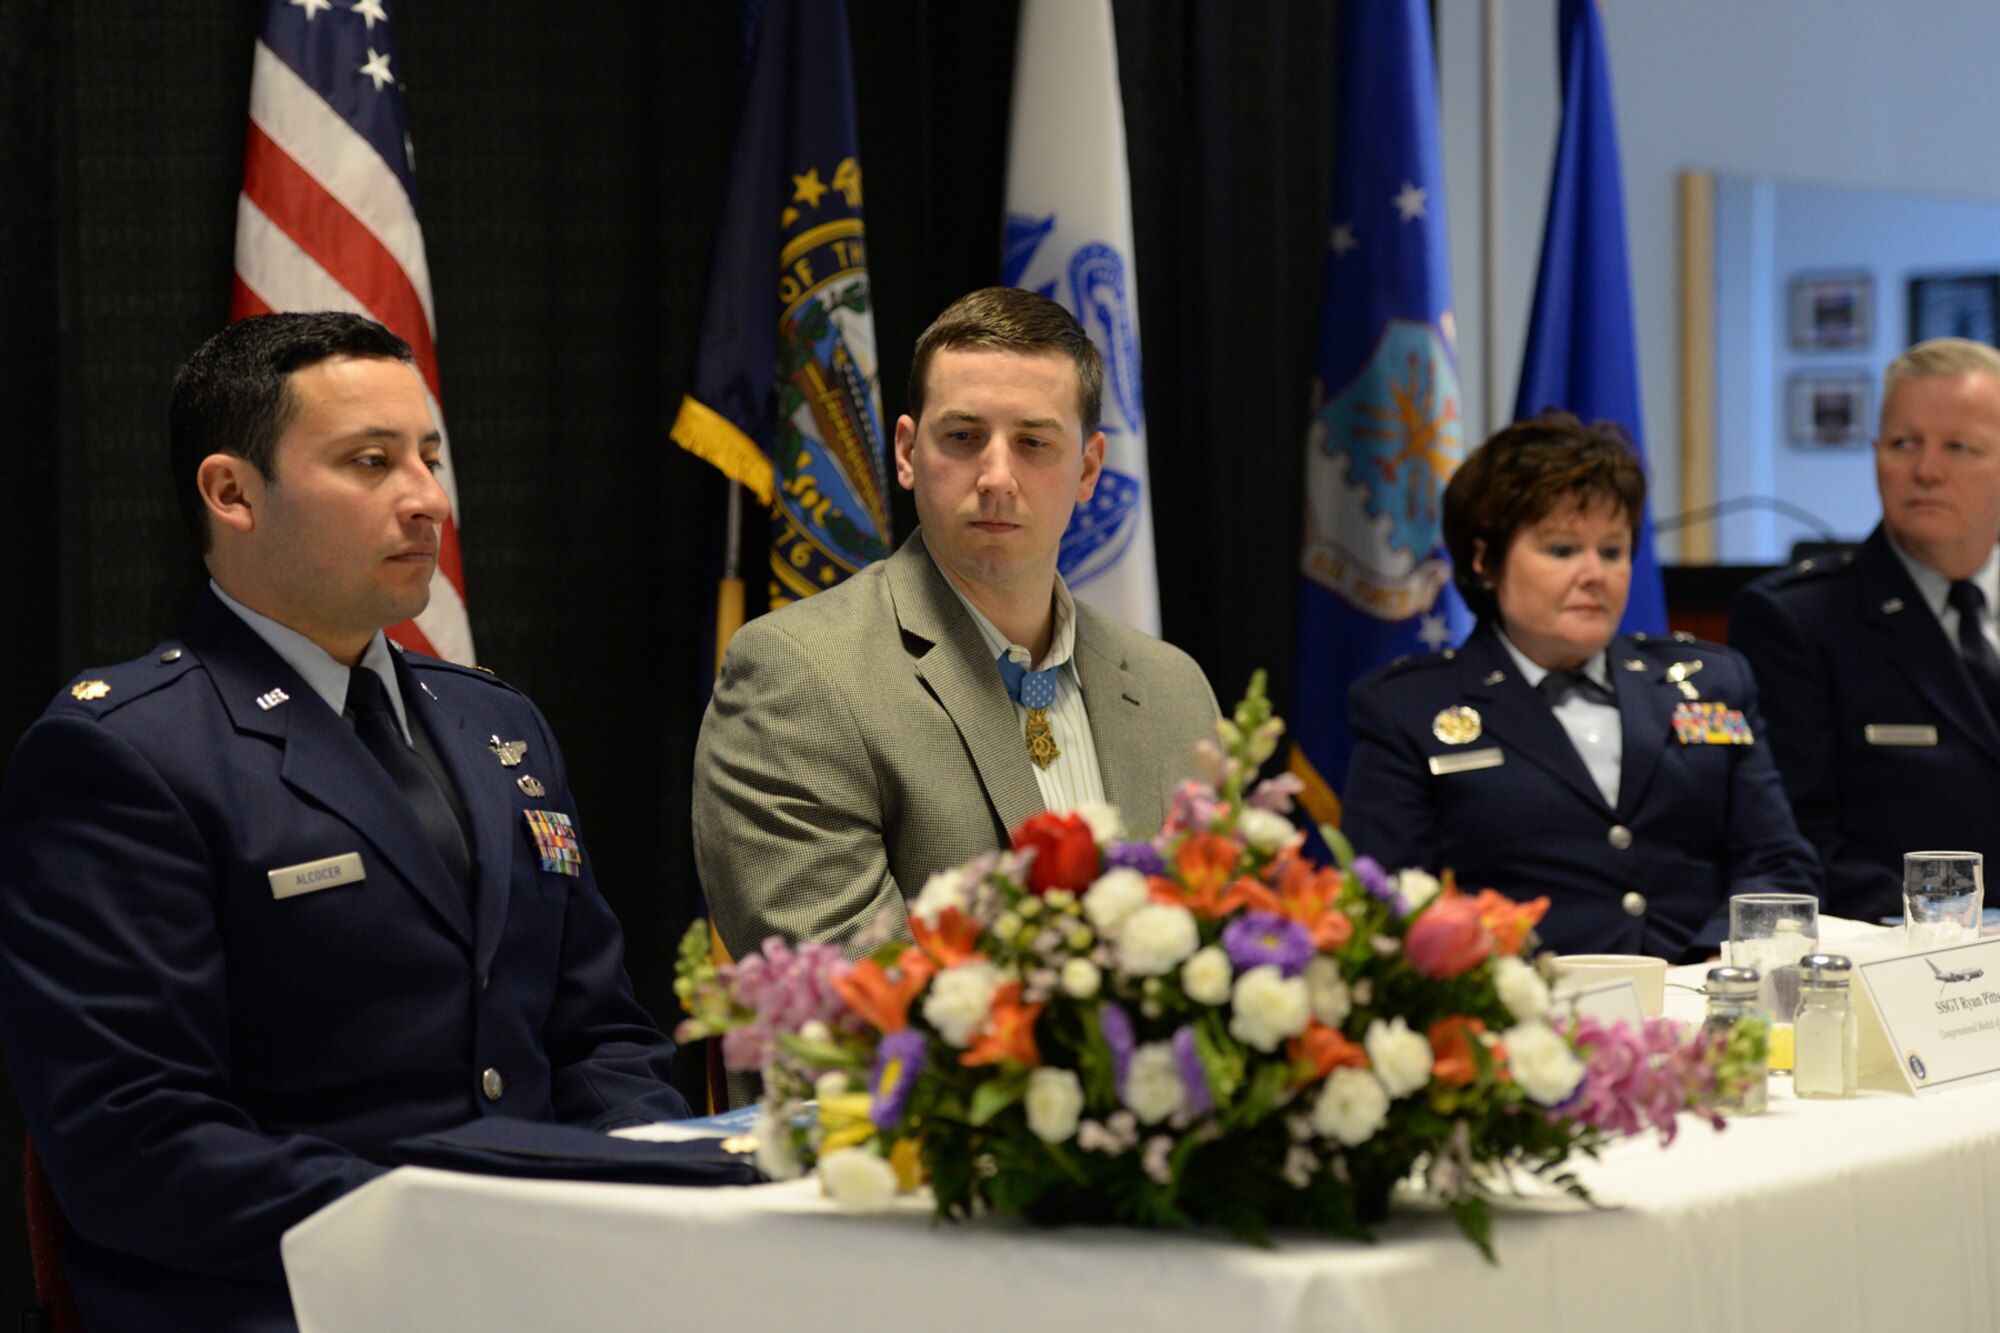 Former U.S. Army Staff Sgt. Ryan Pitts (center) listens during the Commander’s Annual Prayer Breakfast, Pease Air National Guard Base, N.H. April 12, 2015.  Pitts, a 2014 Medal of Honor recipient was guest speaker at the event. (U.S. Air National Guard photo by Staff Sgt. Curtis J. Lenz)